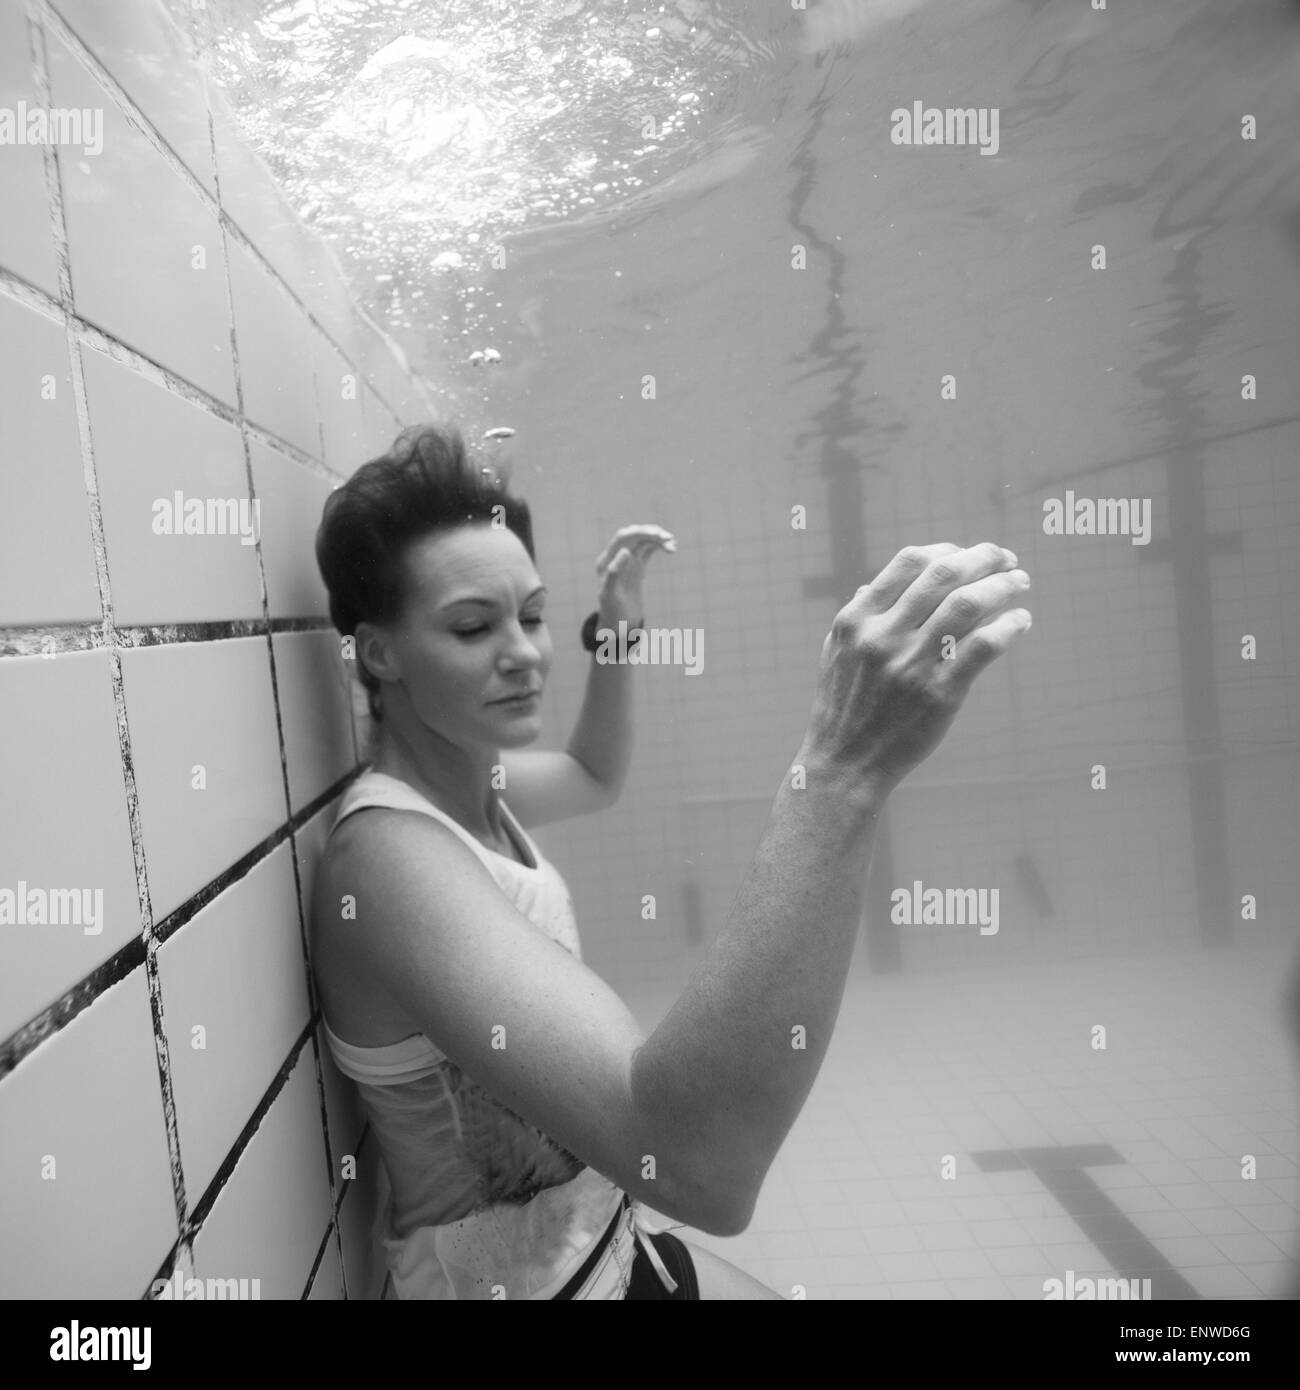 Woman freediving in a pool Stock Photo